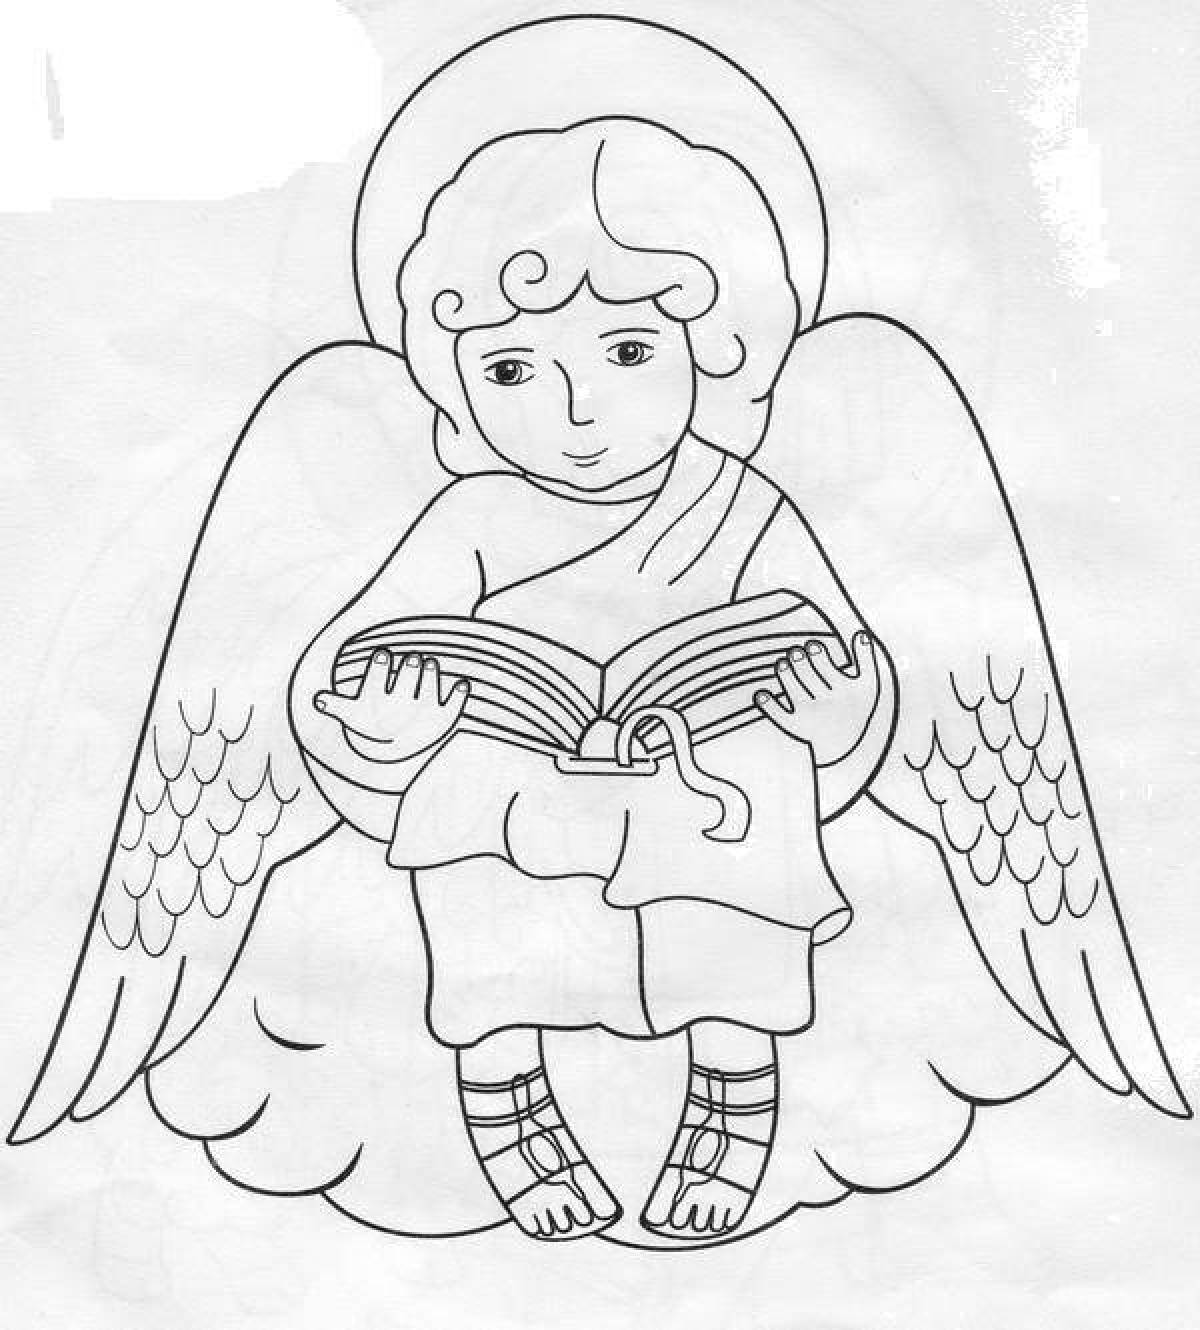 Charming Orthodox coloring book